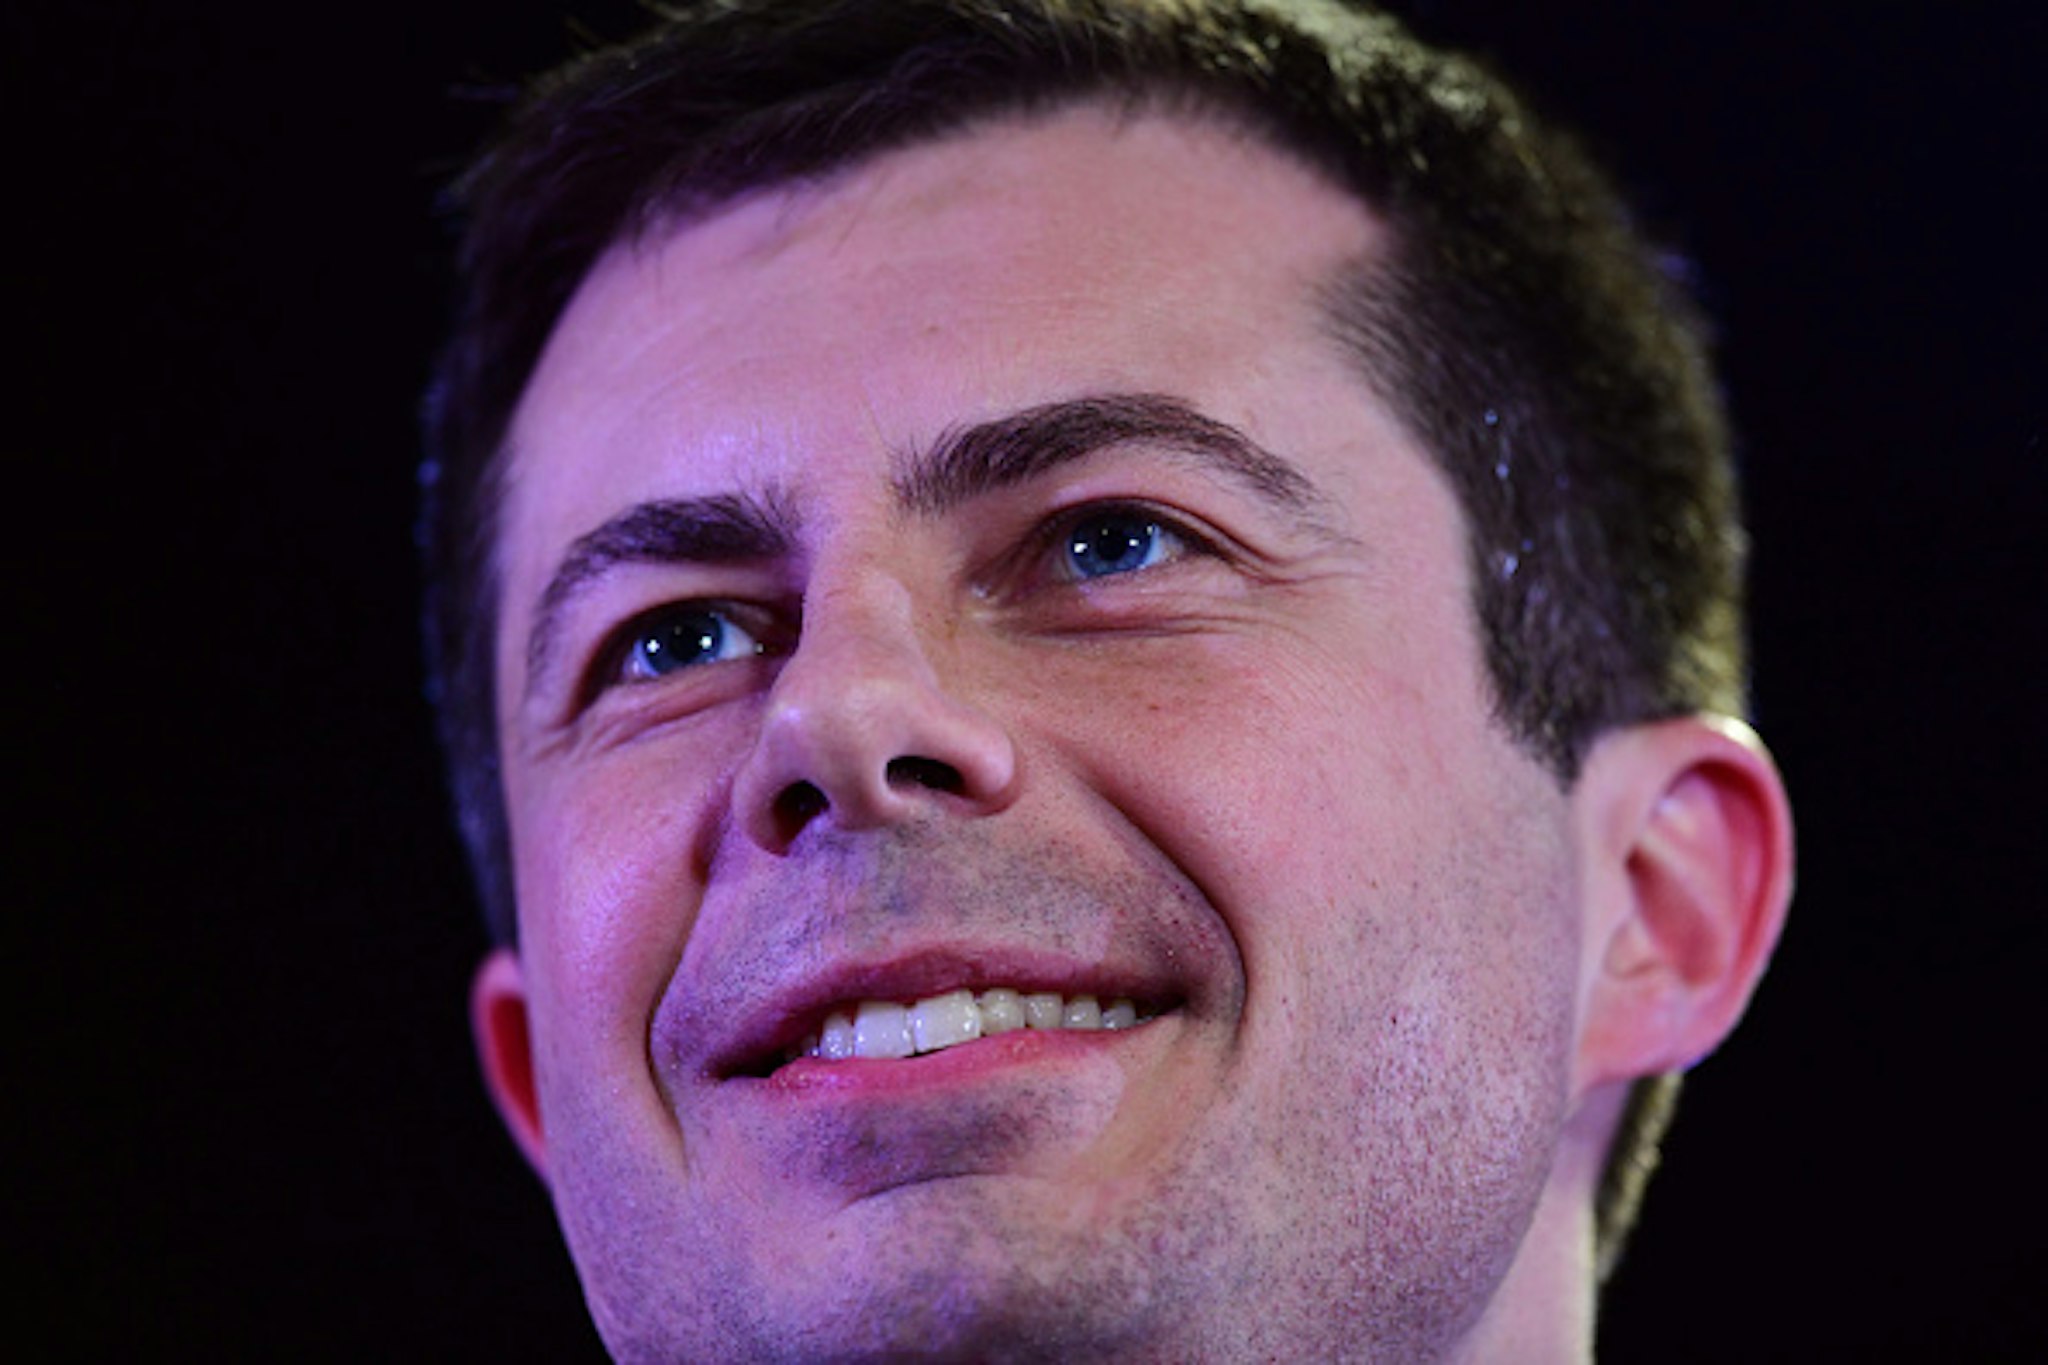 AURORA, CO - FEBRUARY 22: Presidential candidate Pete Buttigieg addresses during the town hall meeting at Crowne Plaza Denver Airport Convention Center in Aurora, Colorado on Saturday. February 22, 2020.